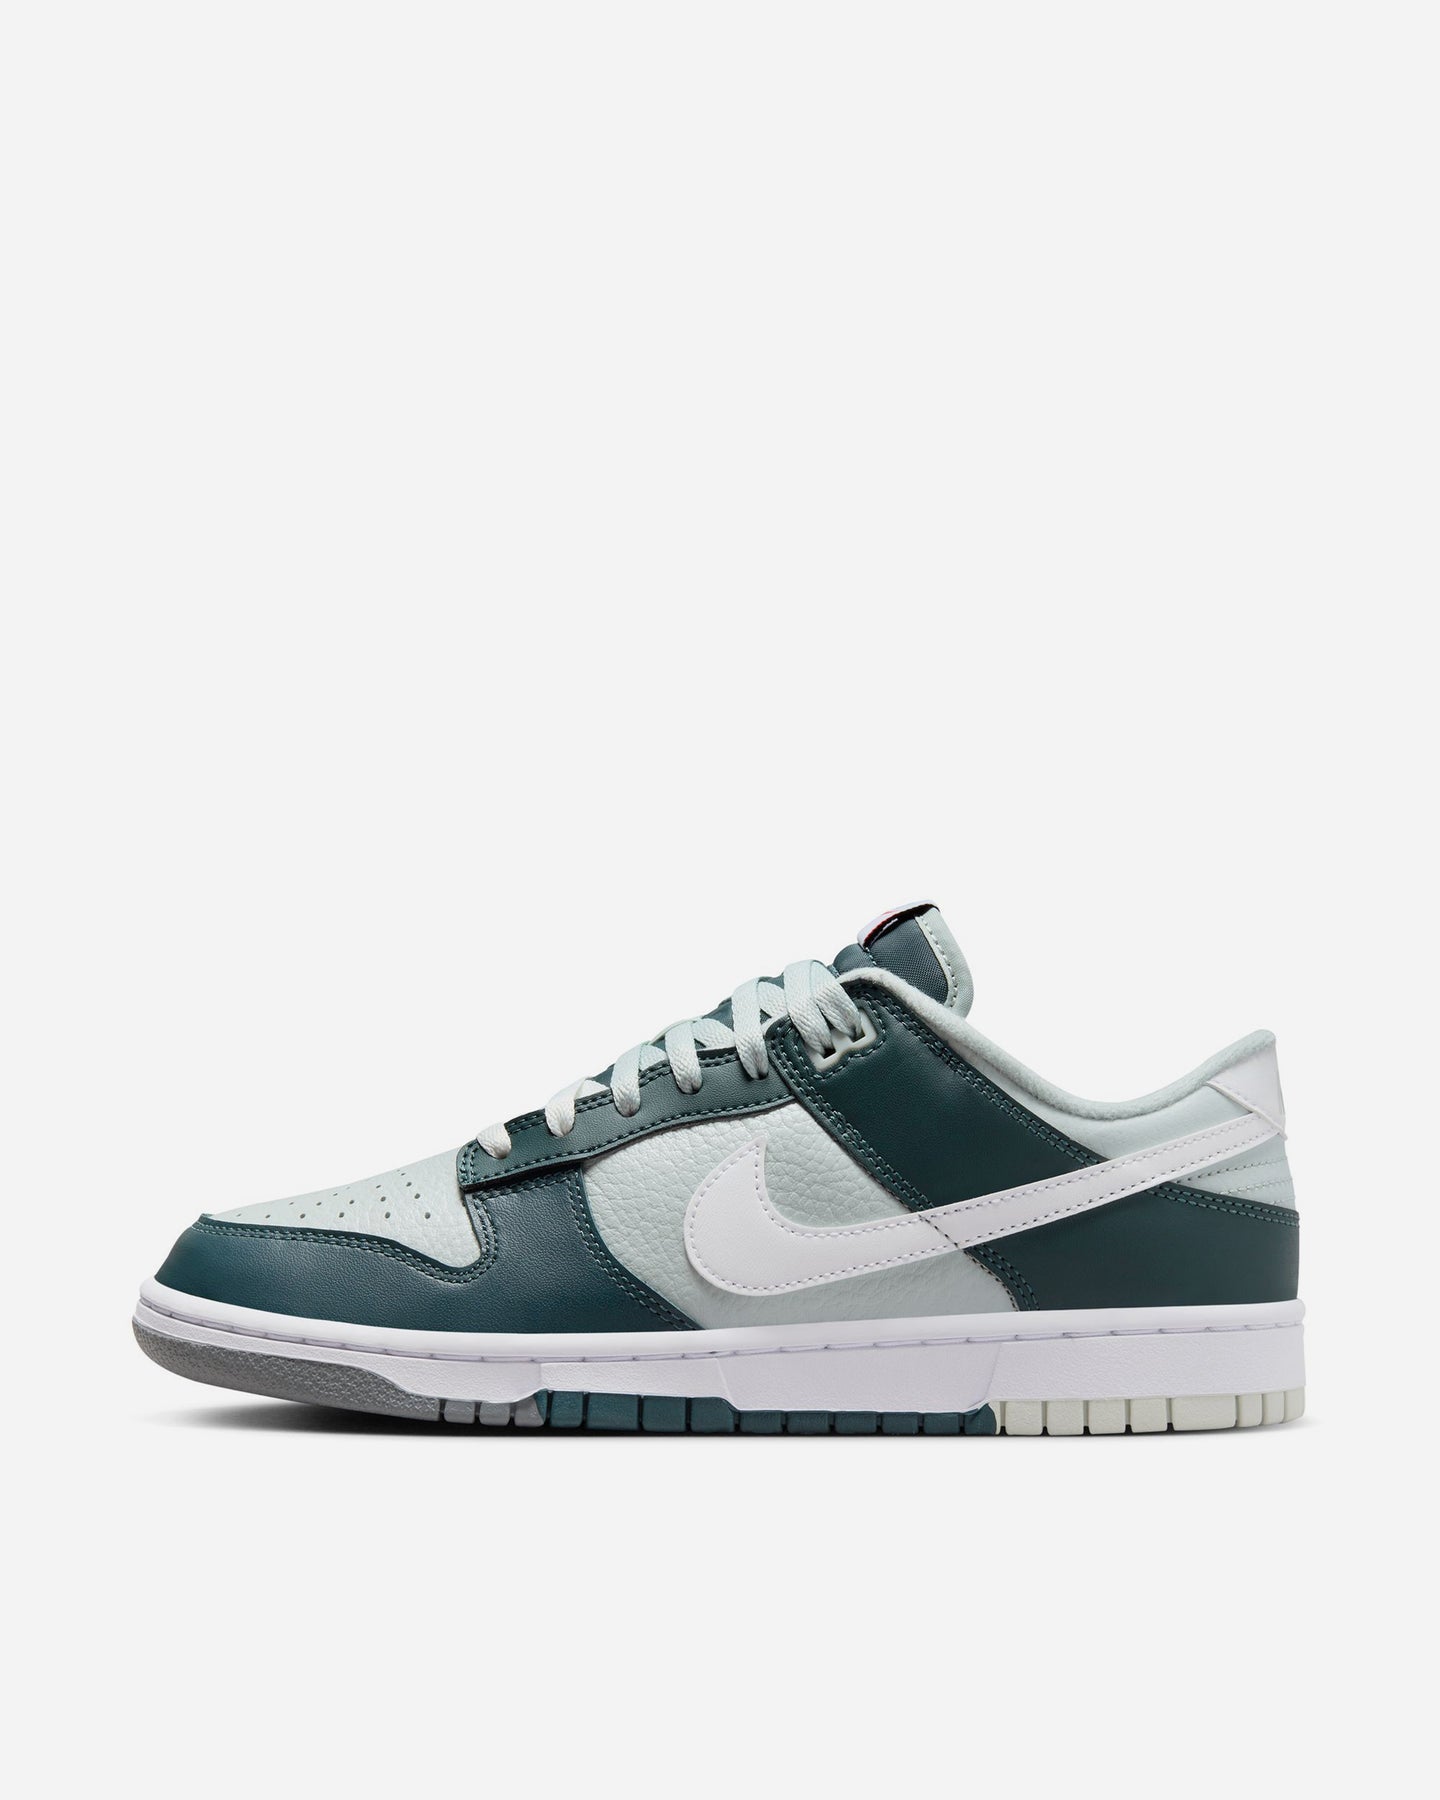 NIKE  DUNK  LOW  プレミアムダンク